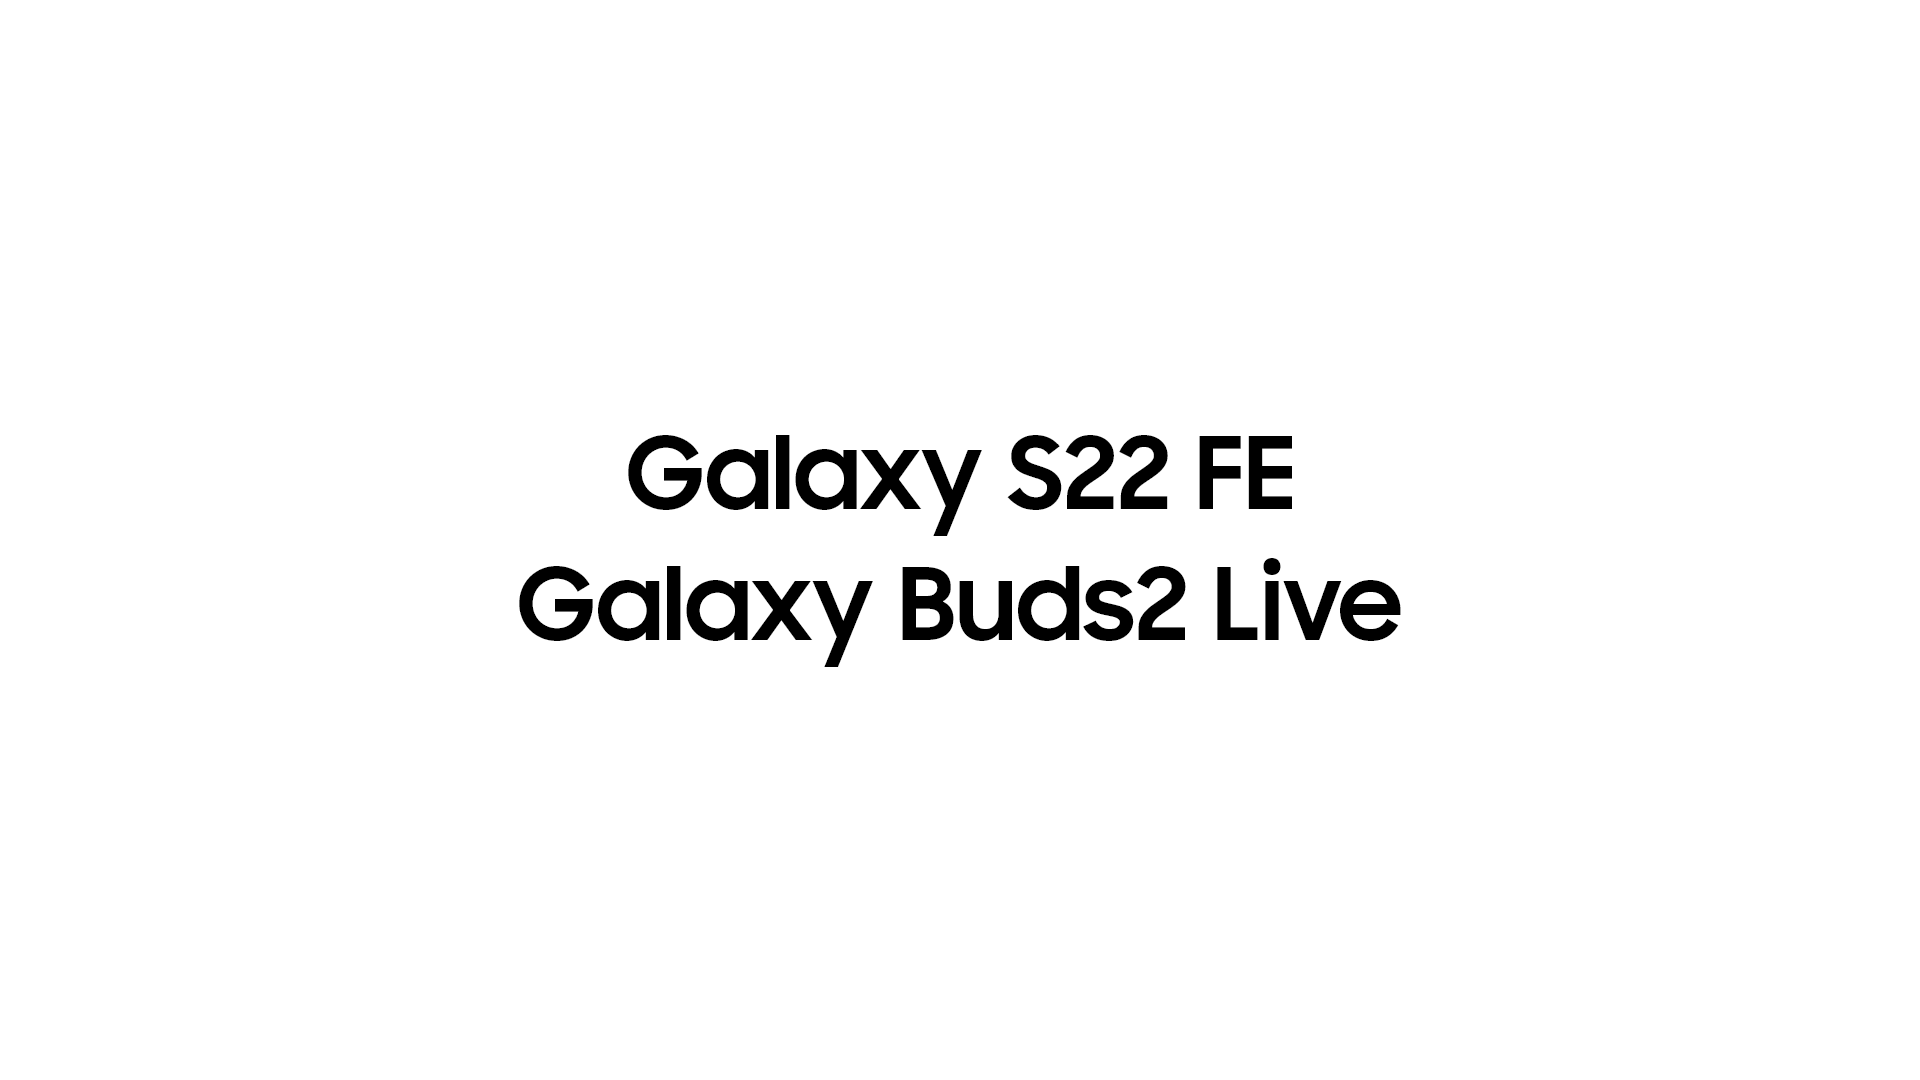 New Galaxy Buds Live are expected to join the alleged Galaxy S22 FE at launch event this spring. - Best-kept Samsung secret! Cheaper flagship-grade phone than Galaxy S23 to steal show soon?